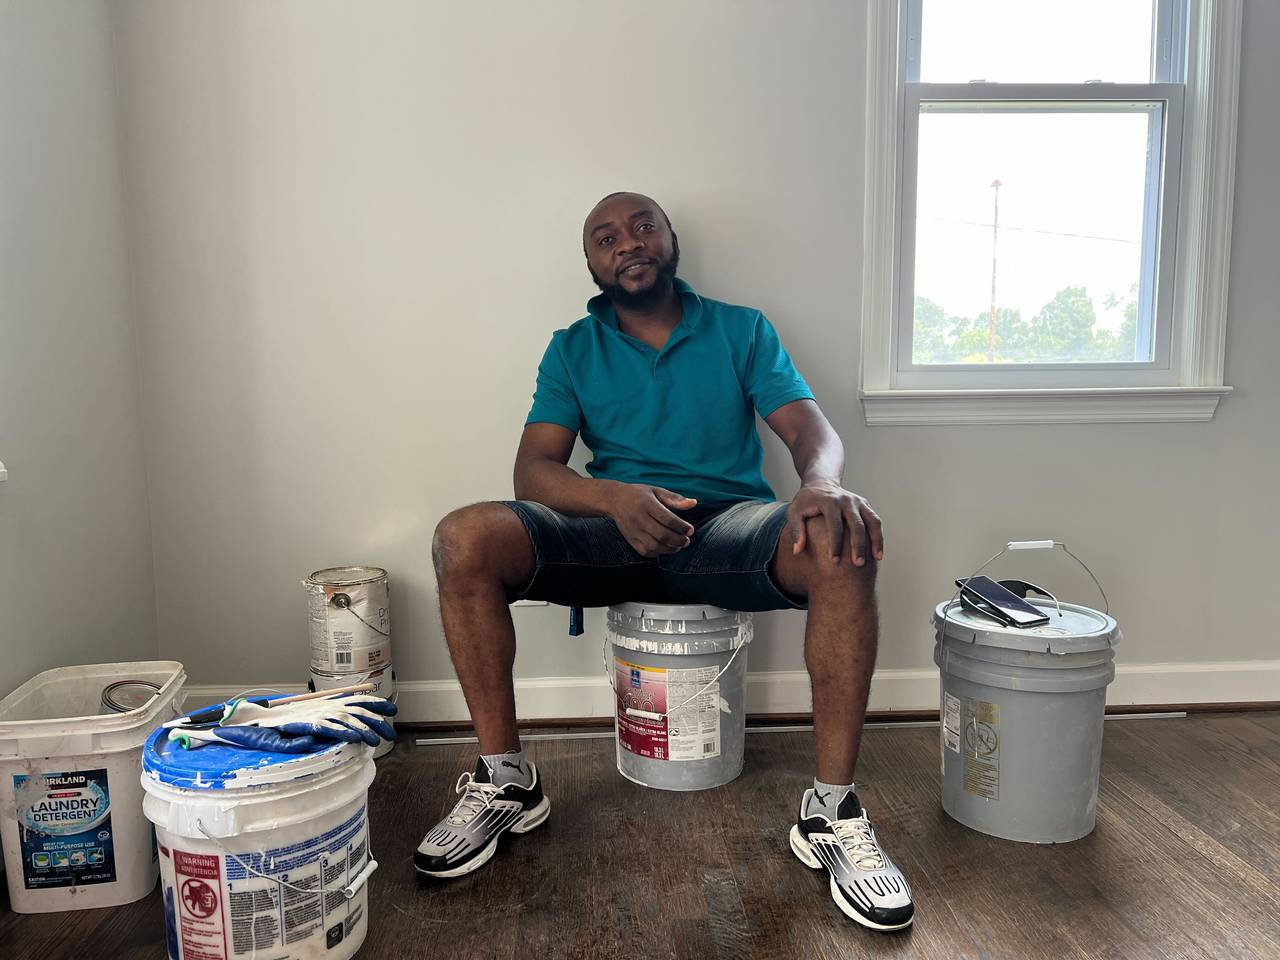 Godlove Mancho, one of 10 Marylanders from Cameroon convicted of sending weapons to their home country, sits inside a home he's renovating in Capitol Heights. He's trying to get as much done as possible before he must report to federal prison.